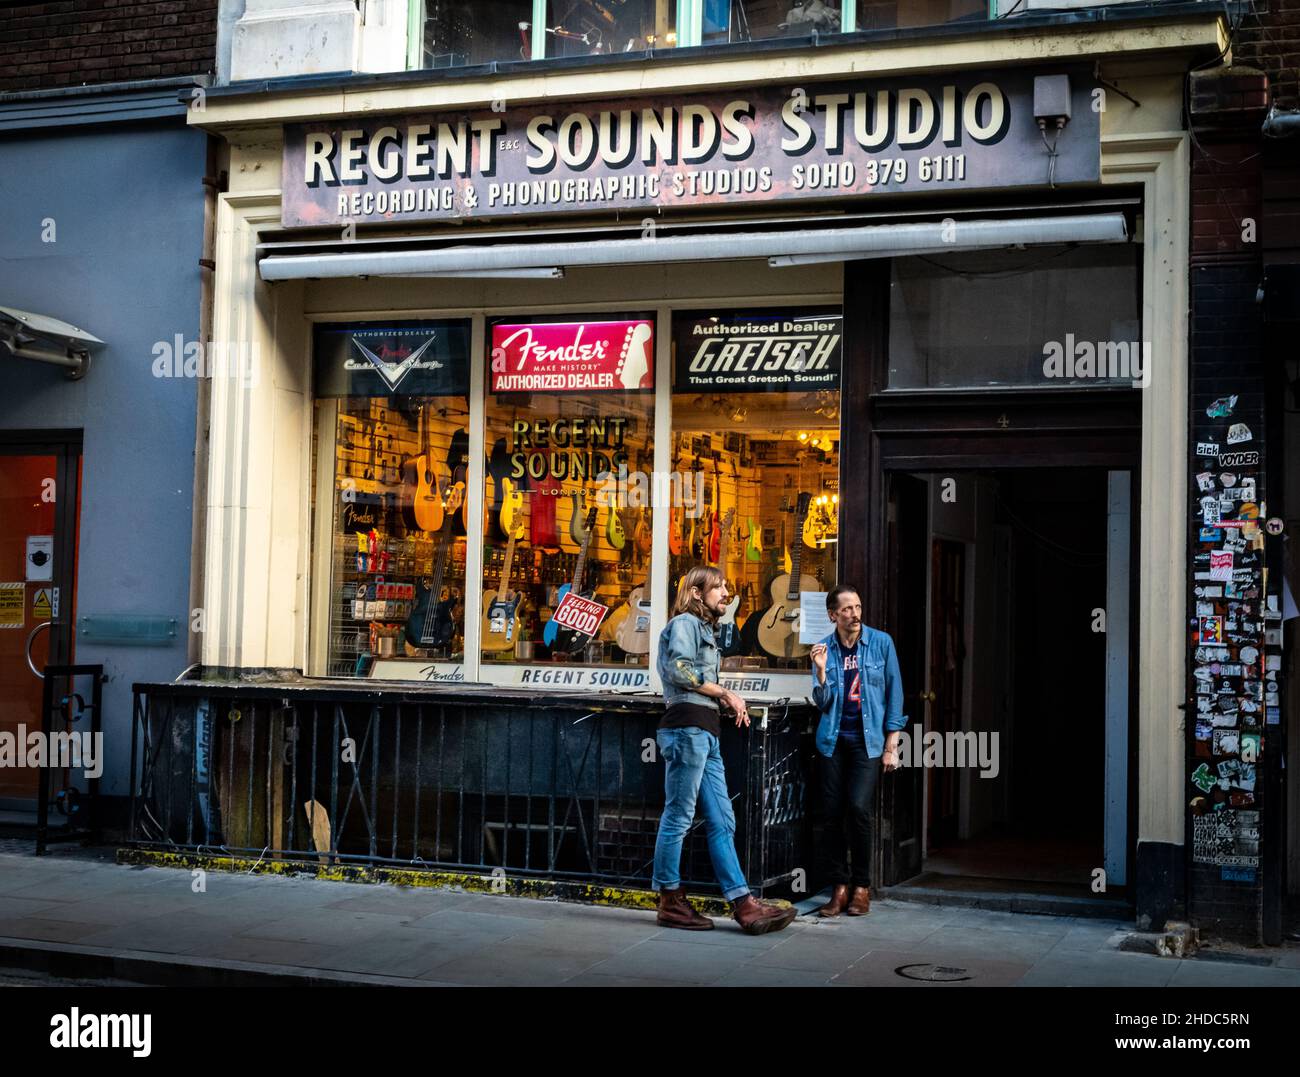 Two denim-clad rockers stand outside the famous music shop and recording studio Regent Sounds in Denmark St, London UK. Stock Photo